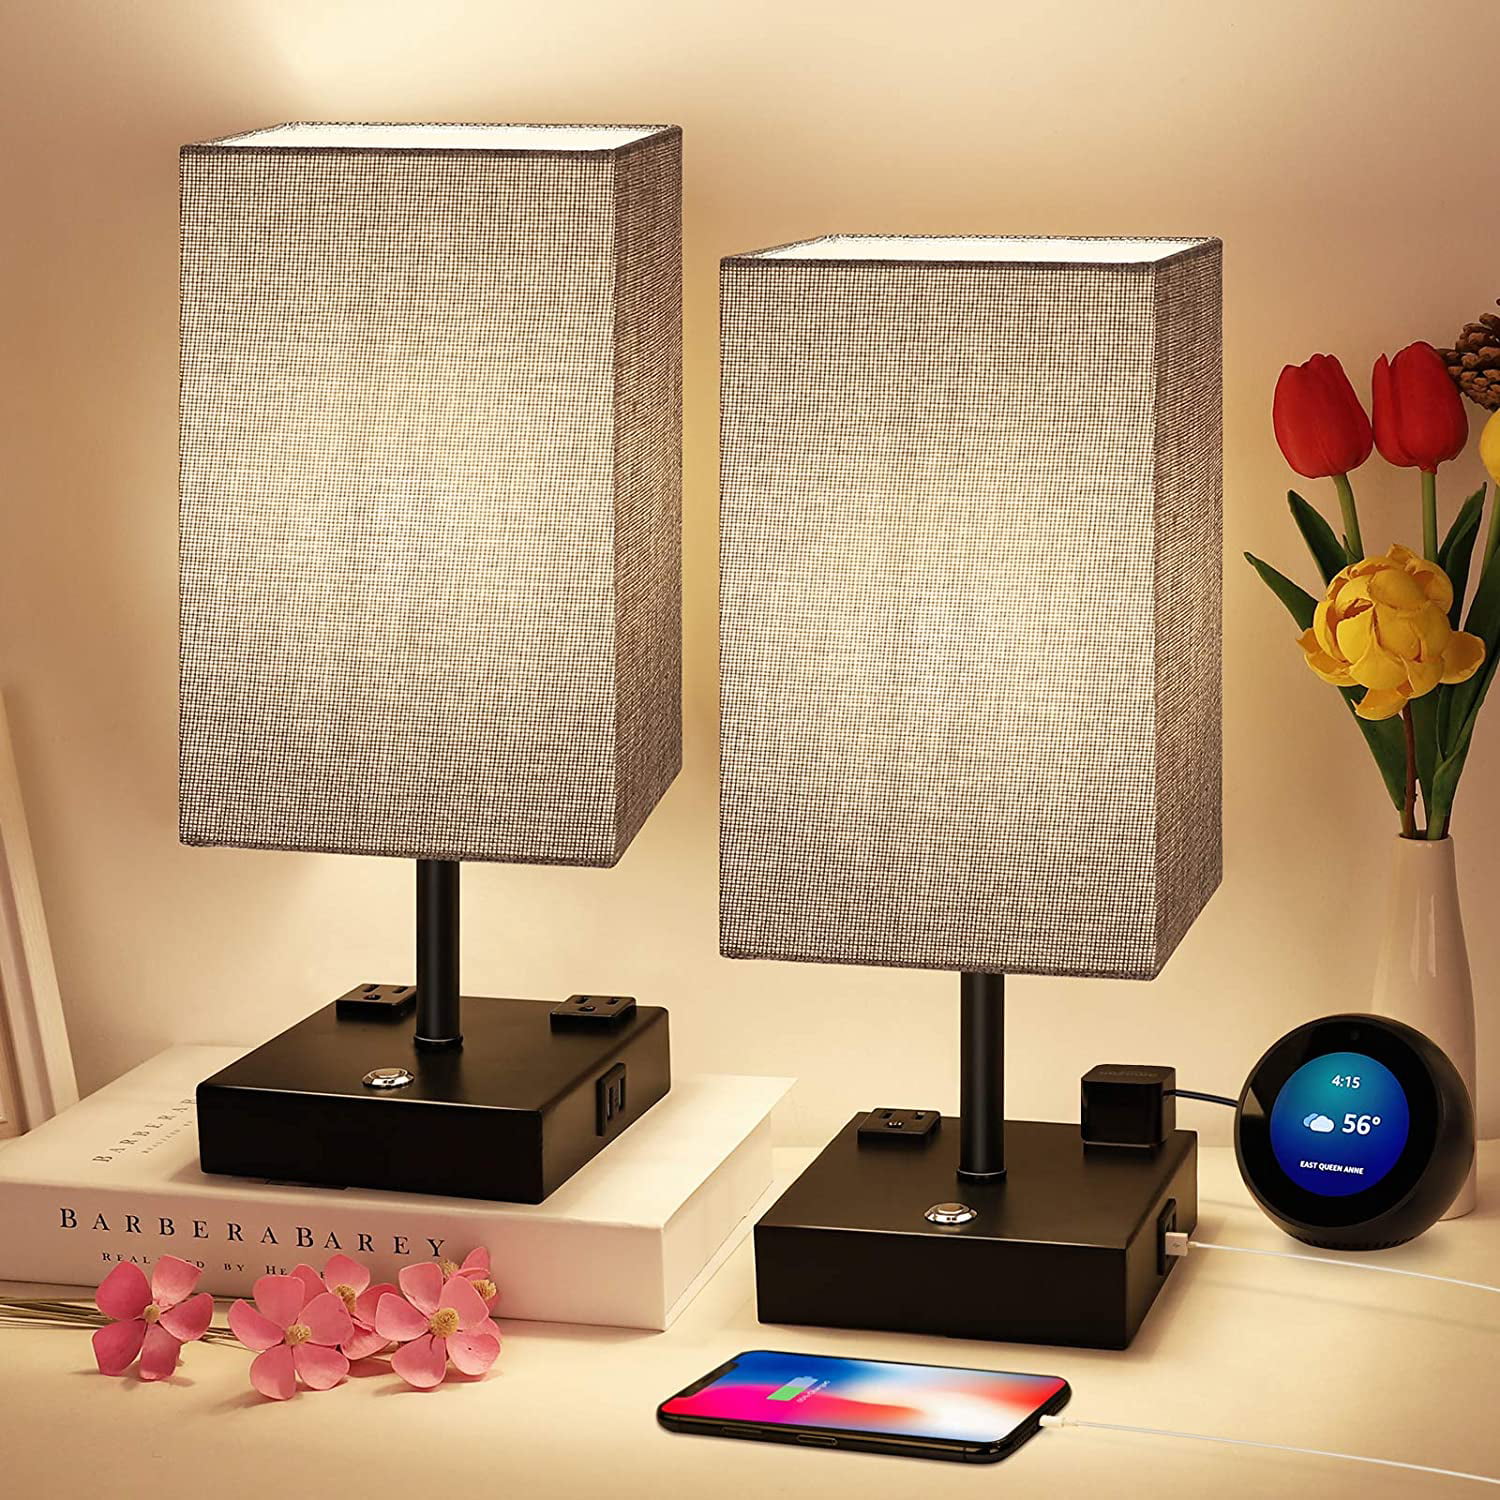 Modern Brushed Chrome Bedside Table Lamps Touch Dimmer Lights Lounge Lighting 